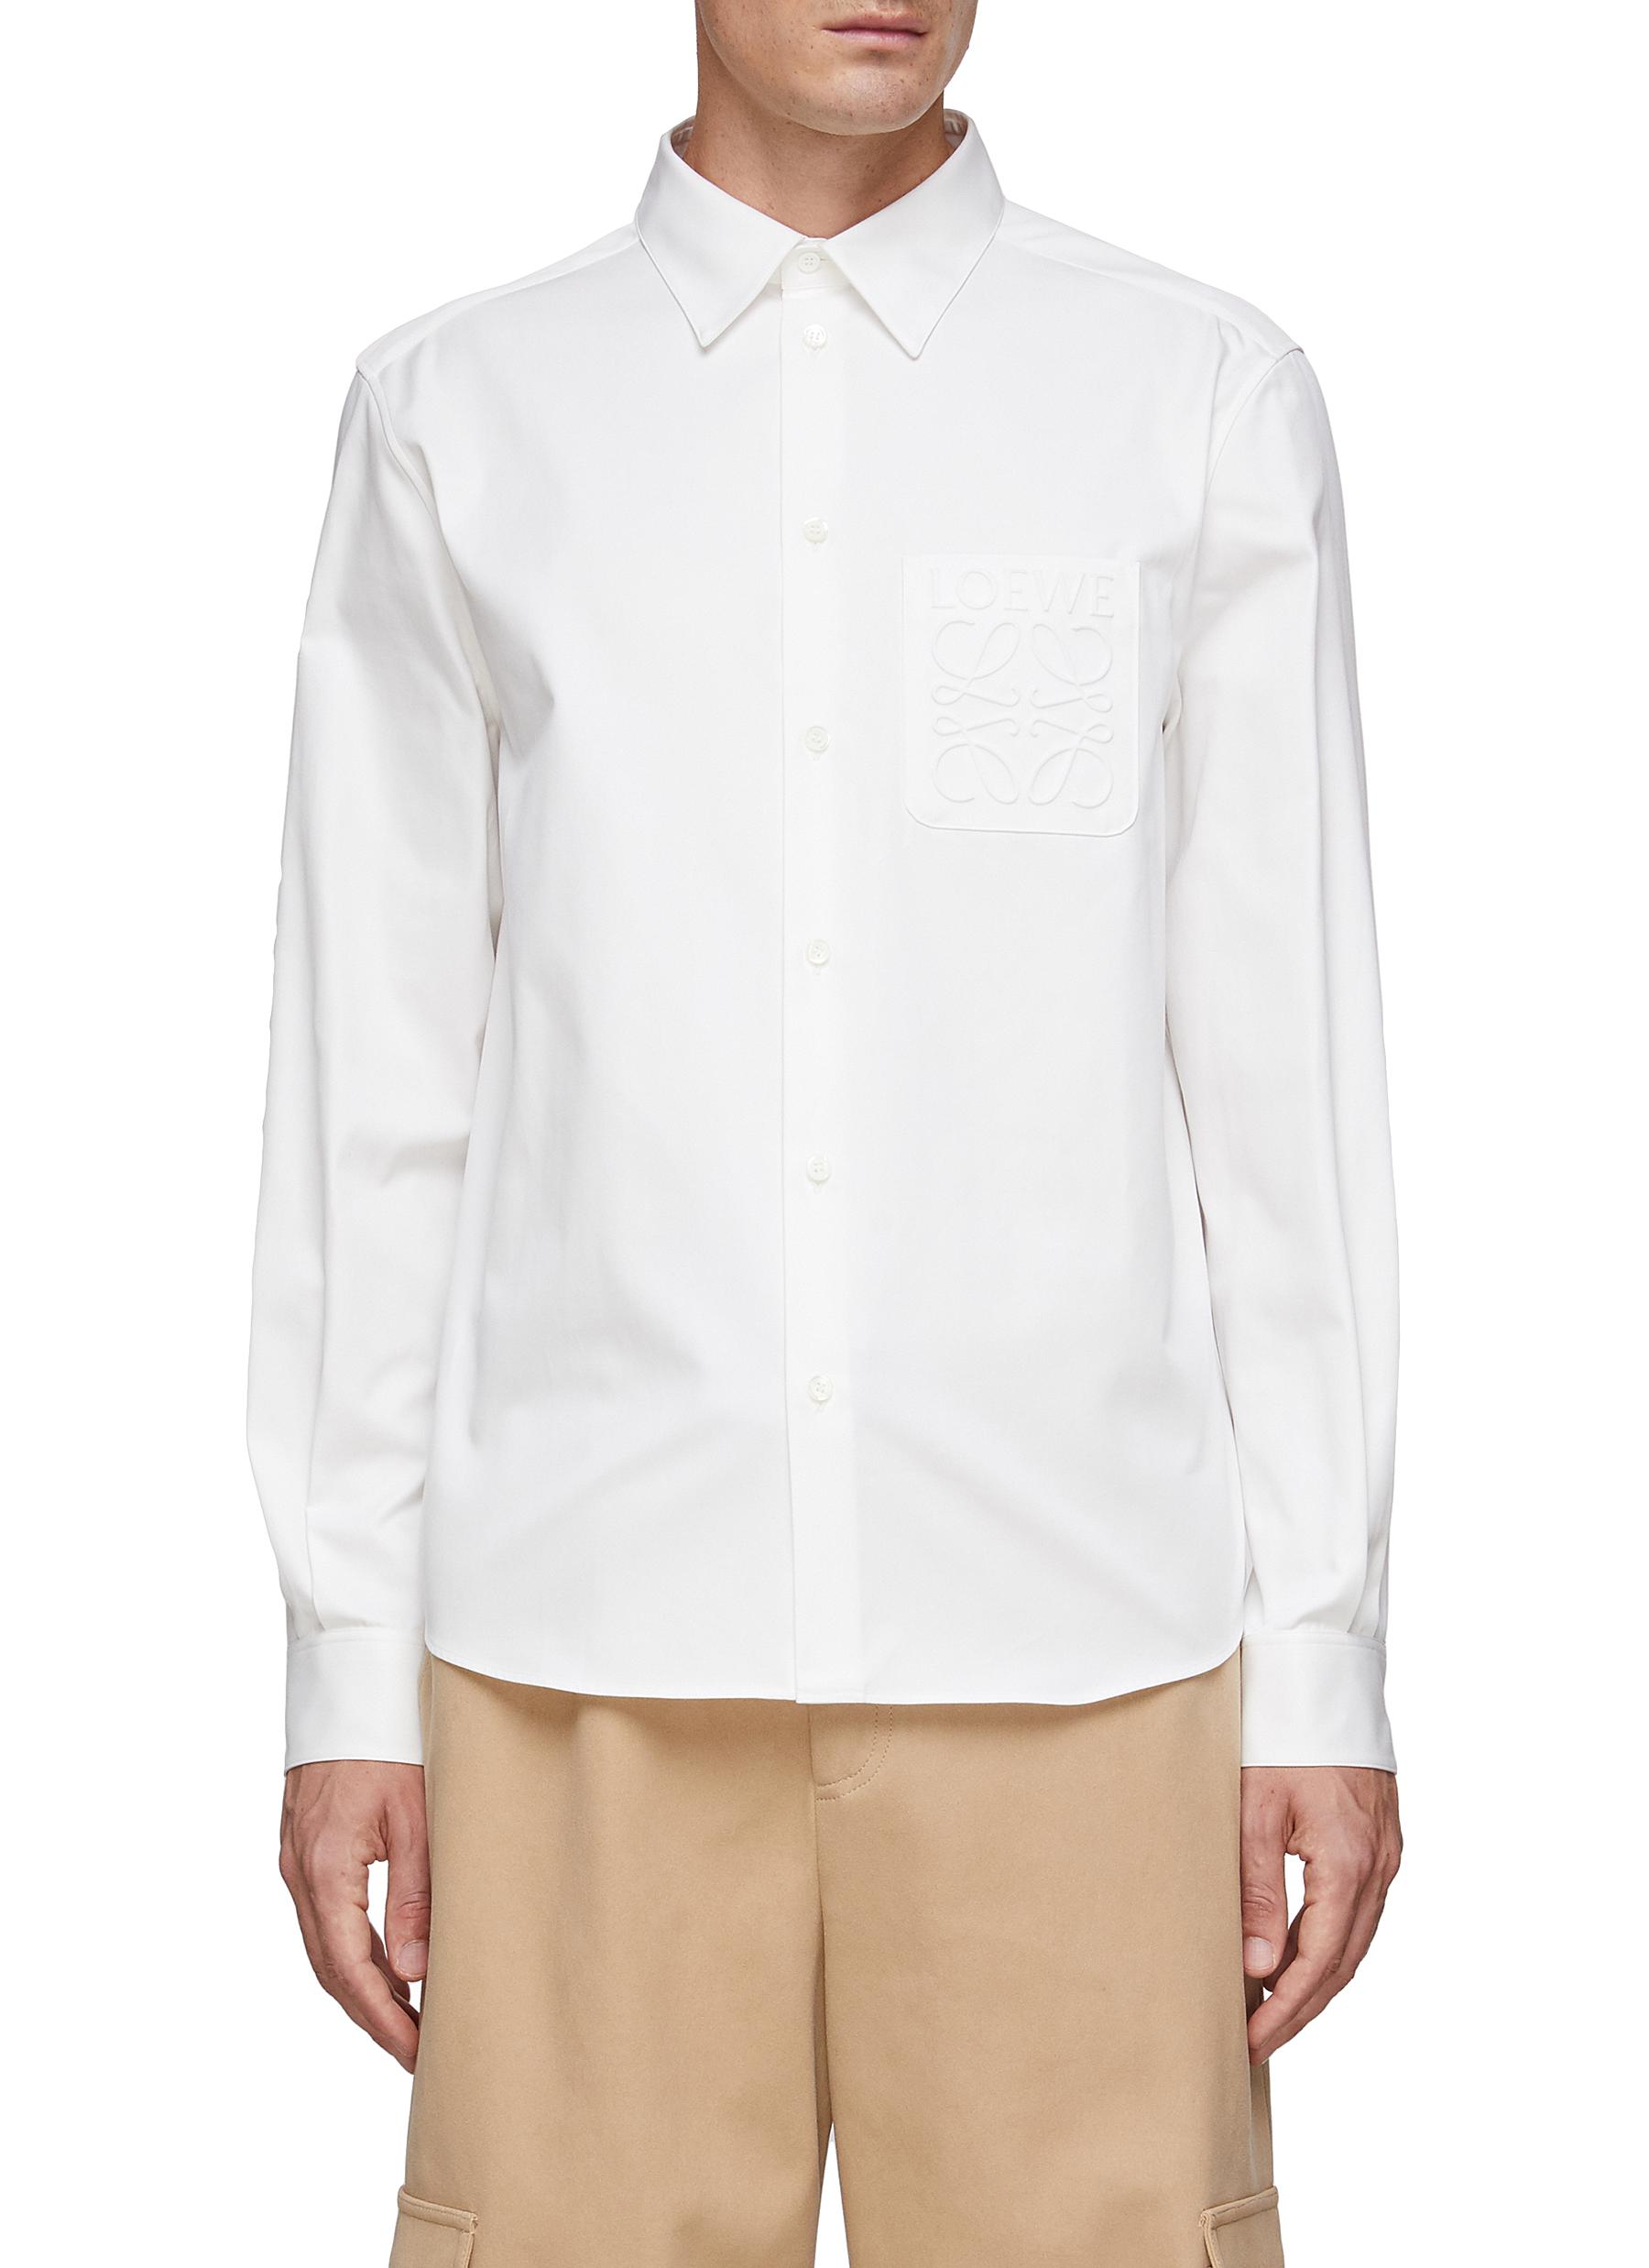 ANAGRAM DEBOSSED PATCH POCKET COTTON BUTTON UP SHIRT